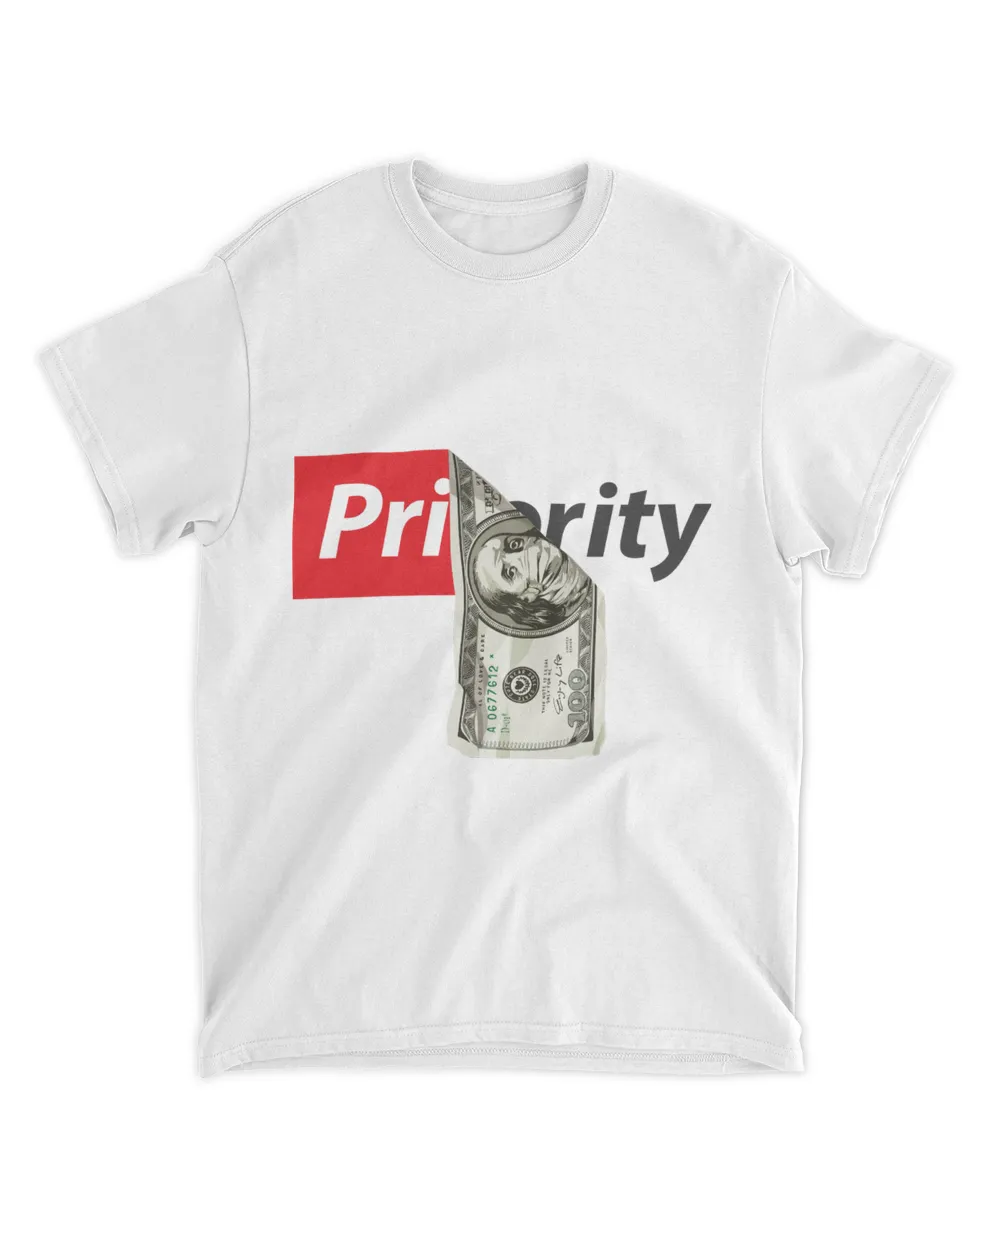 Prioritize confident Moves - Money is the highlight of self-assurance - Money Art T-shirt Maxu